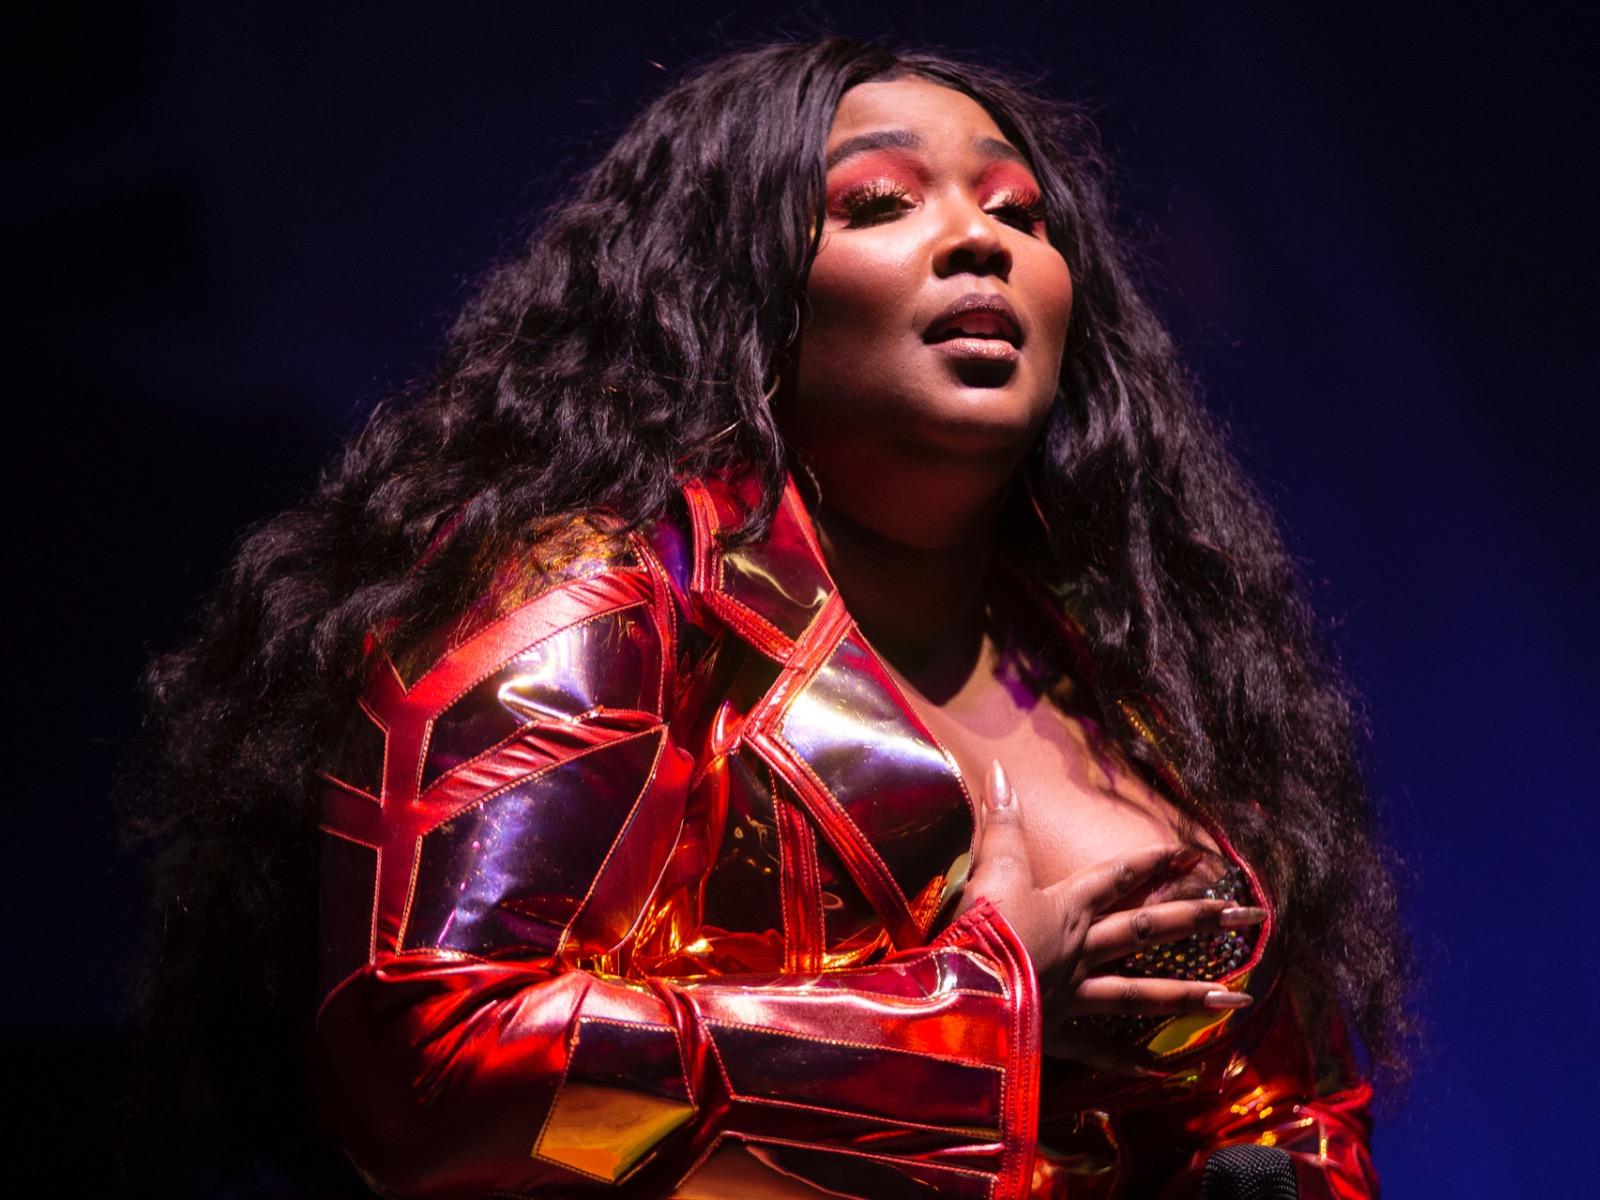 Lizzo triumphed over a tumultuous Summerfest night